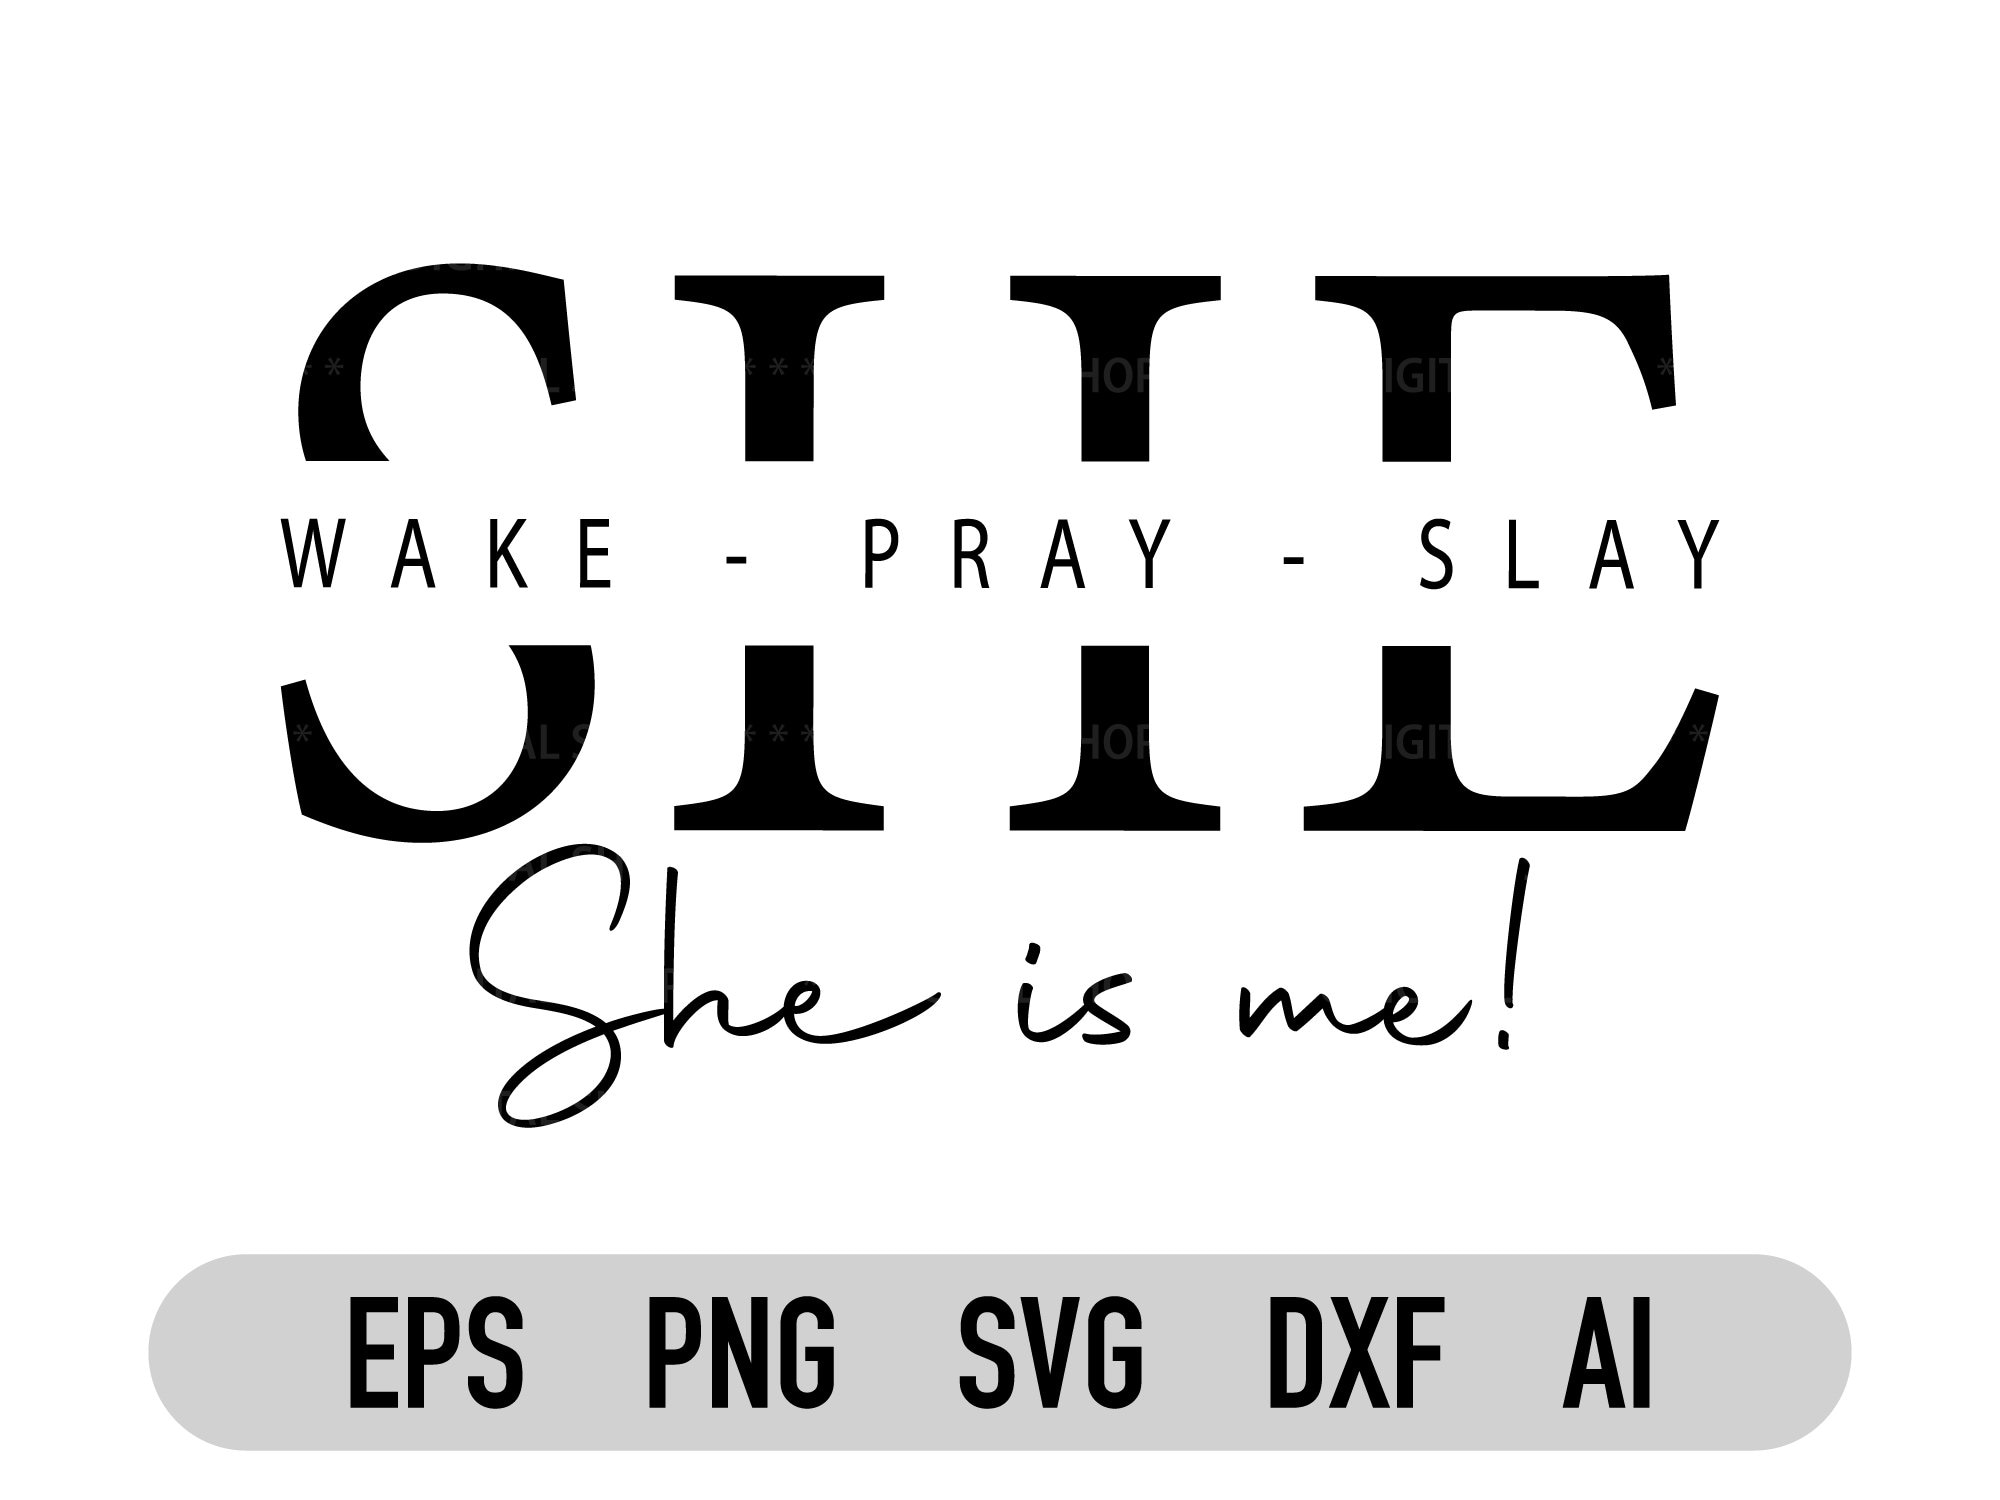 She Slays On Purpose, Motivational Quotes' Sticker | Spreadshirt